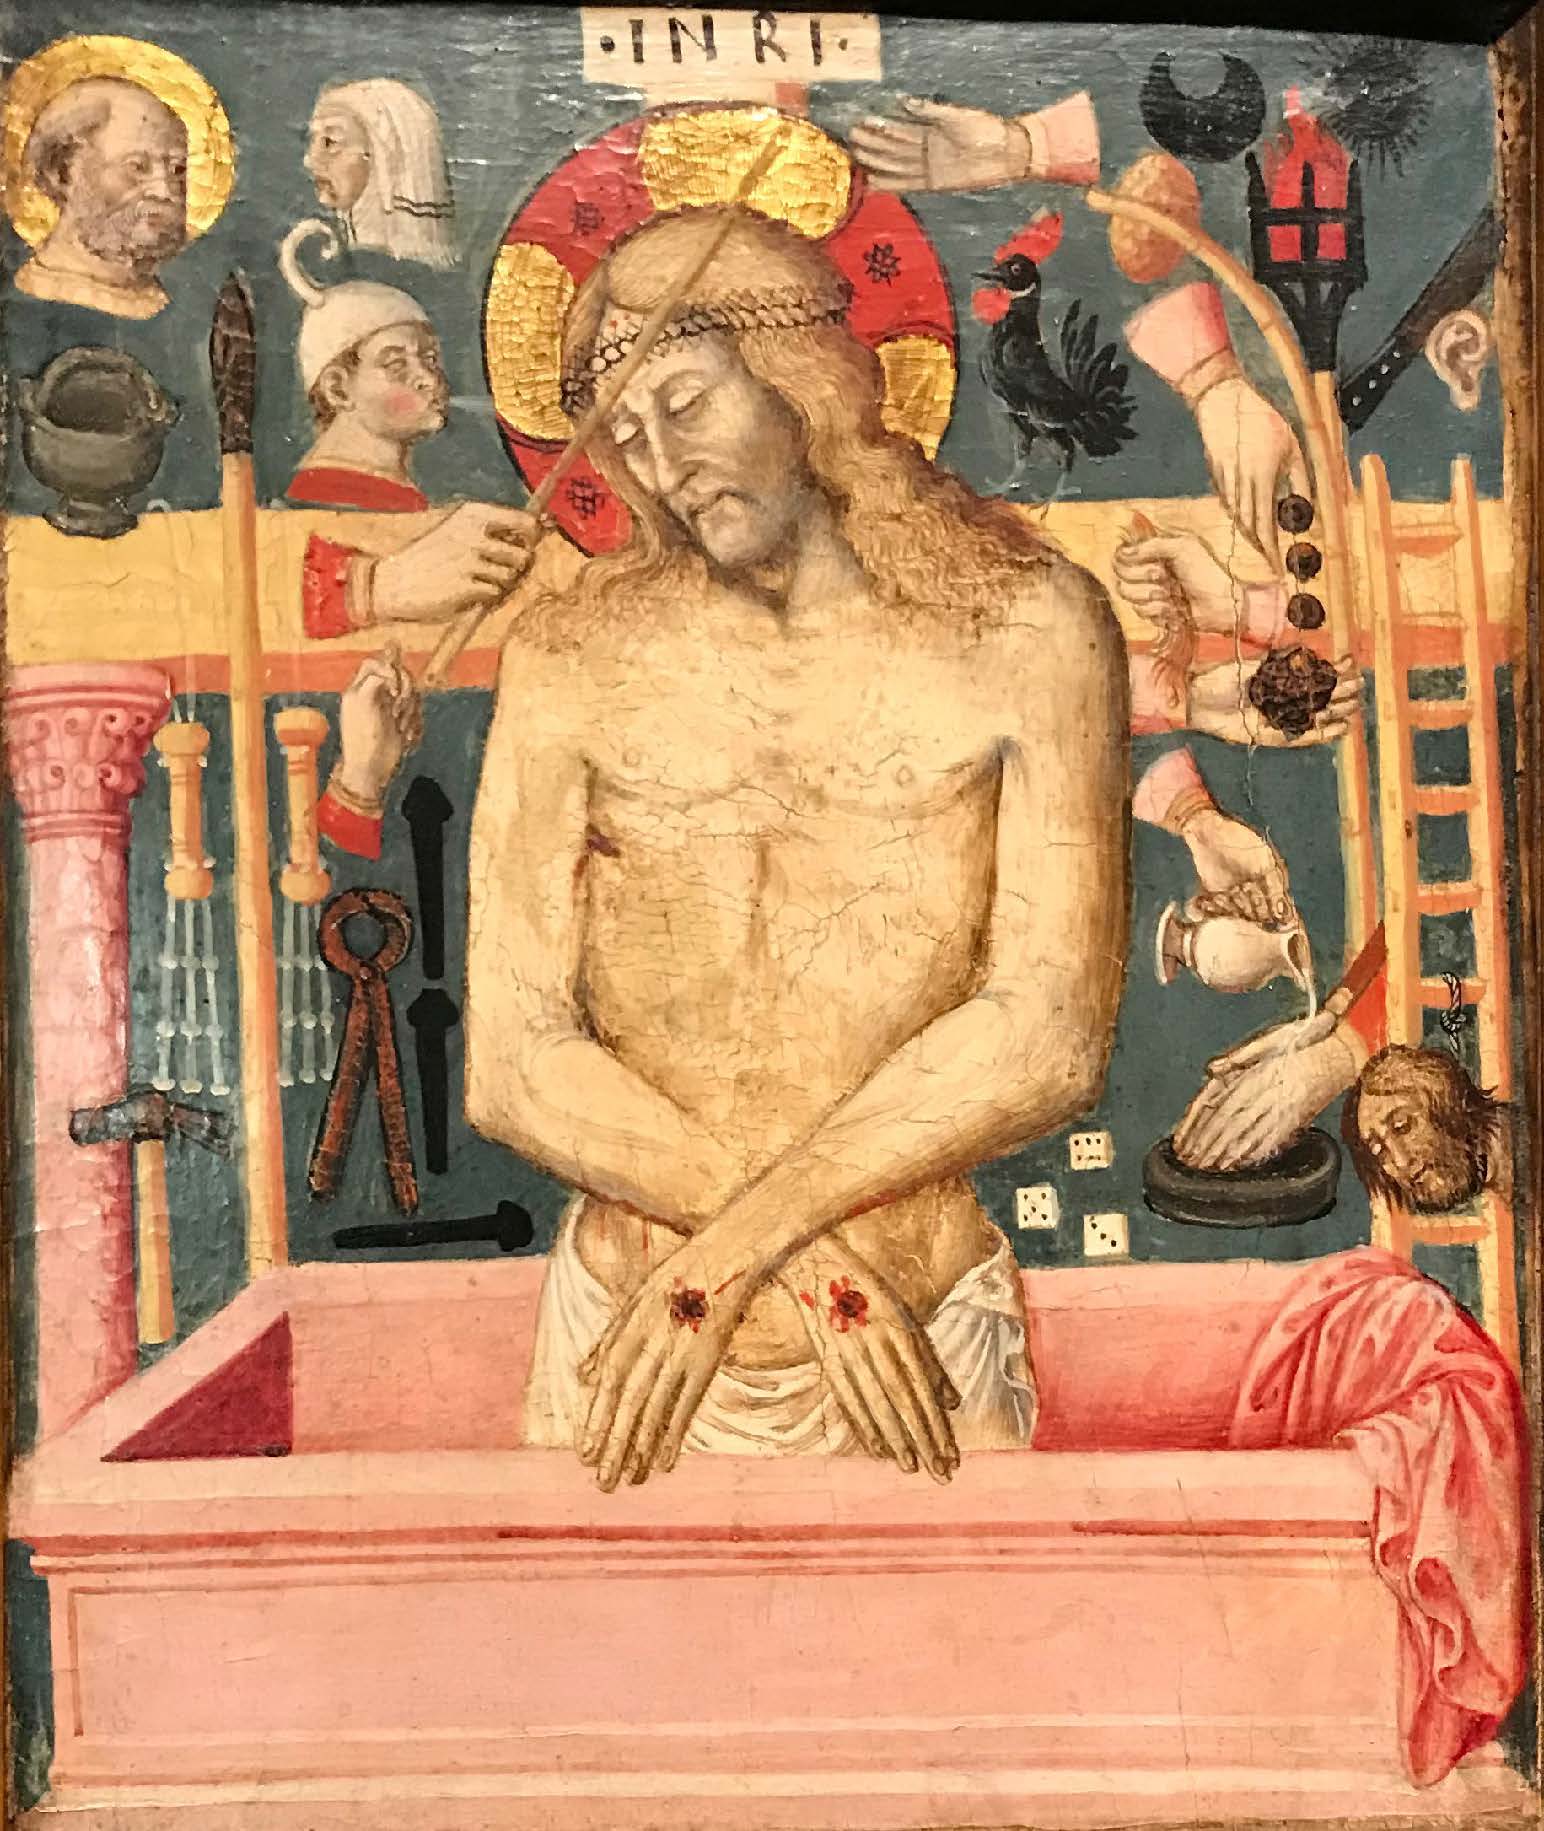 The Man of Sorrows was often accompanied by the Arma Christi so that one image portrayed the entire story of his suffering, death, and resurrection. Christ as the Man of Sorrows, with the “Arma Christi,” detail, last quarter of the fifteenth century. Wallraf-Richartz-Museum, Köln.